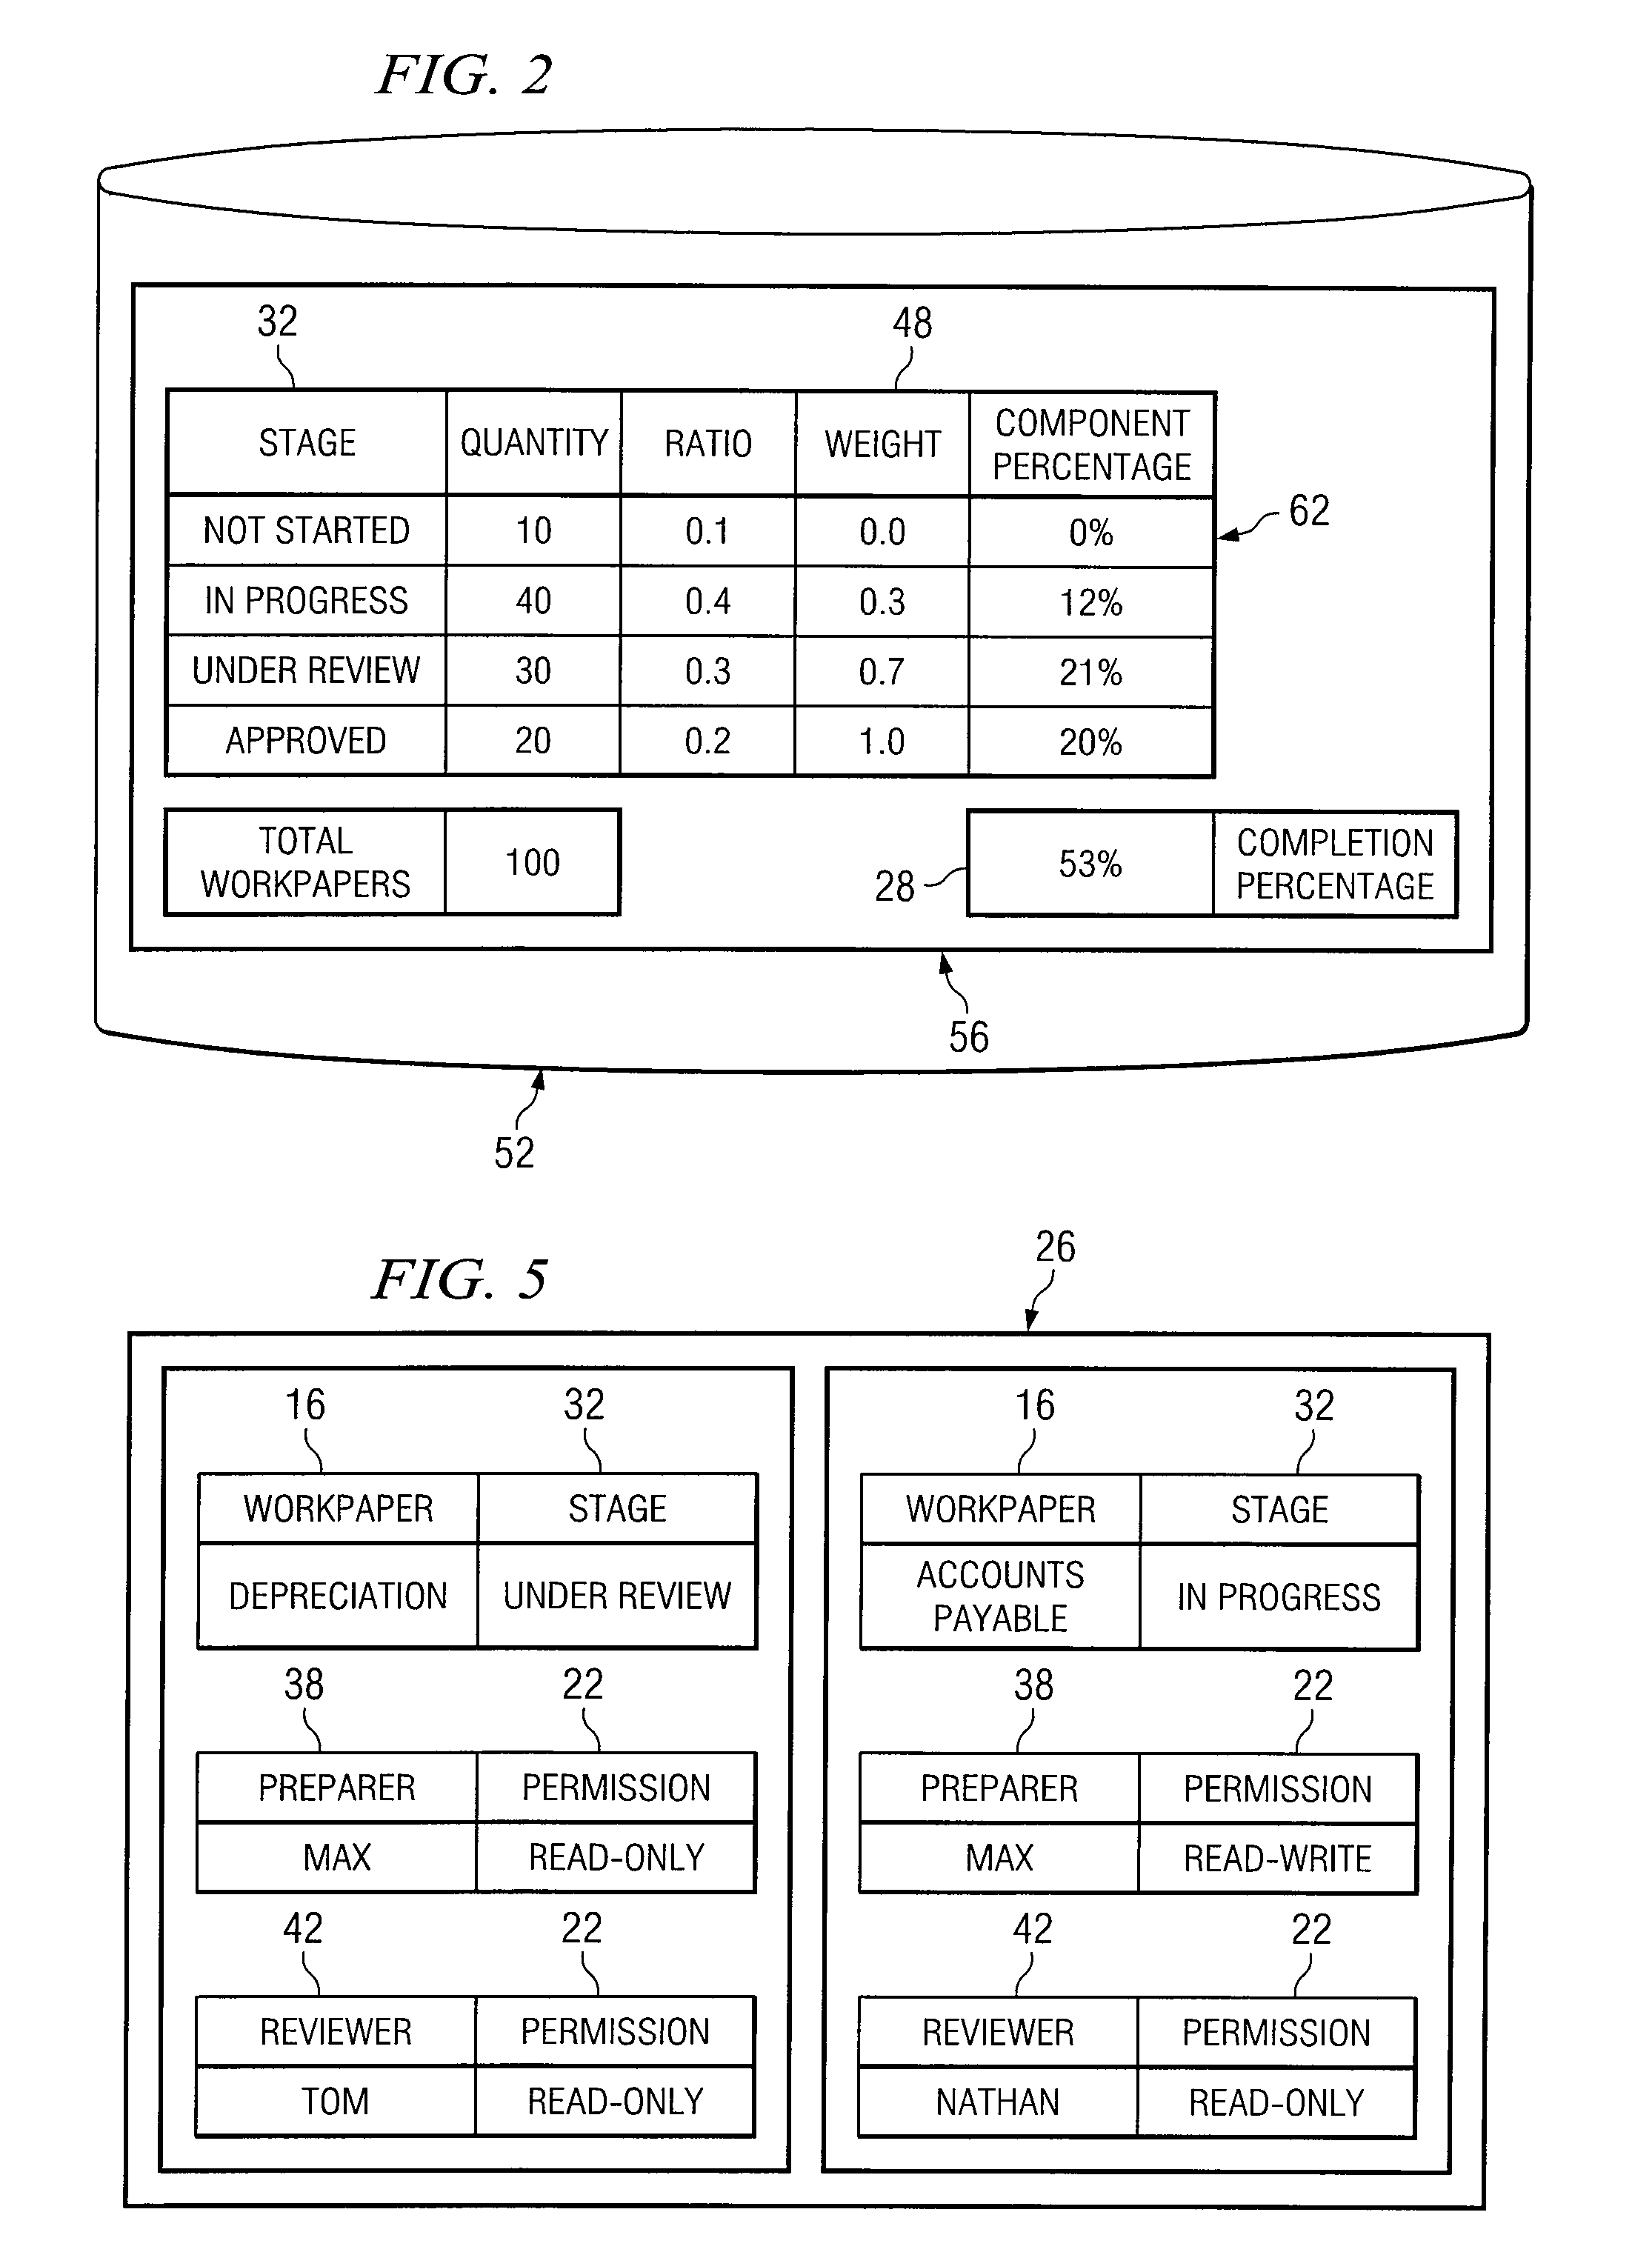 System and Method for Monitoring Workflow in a Project Management System